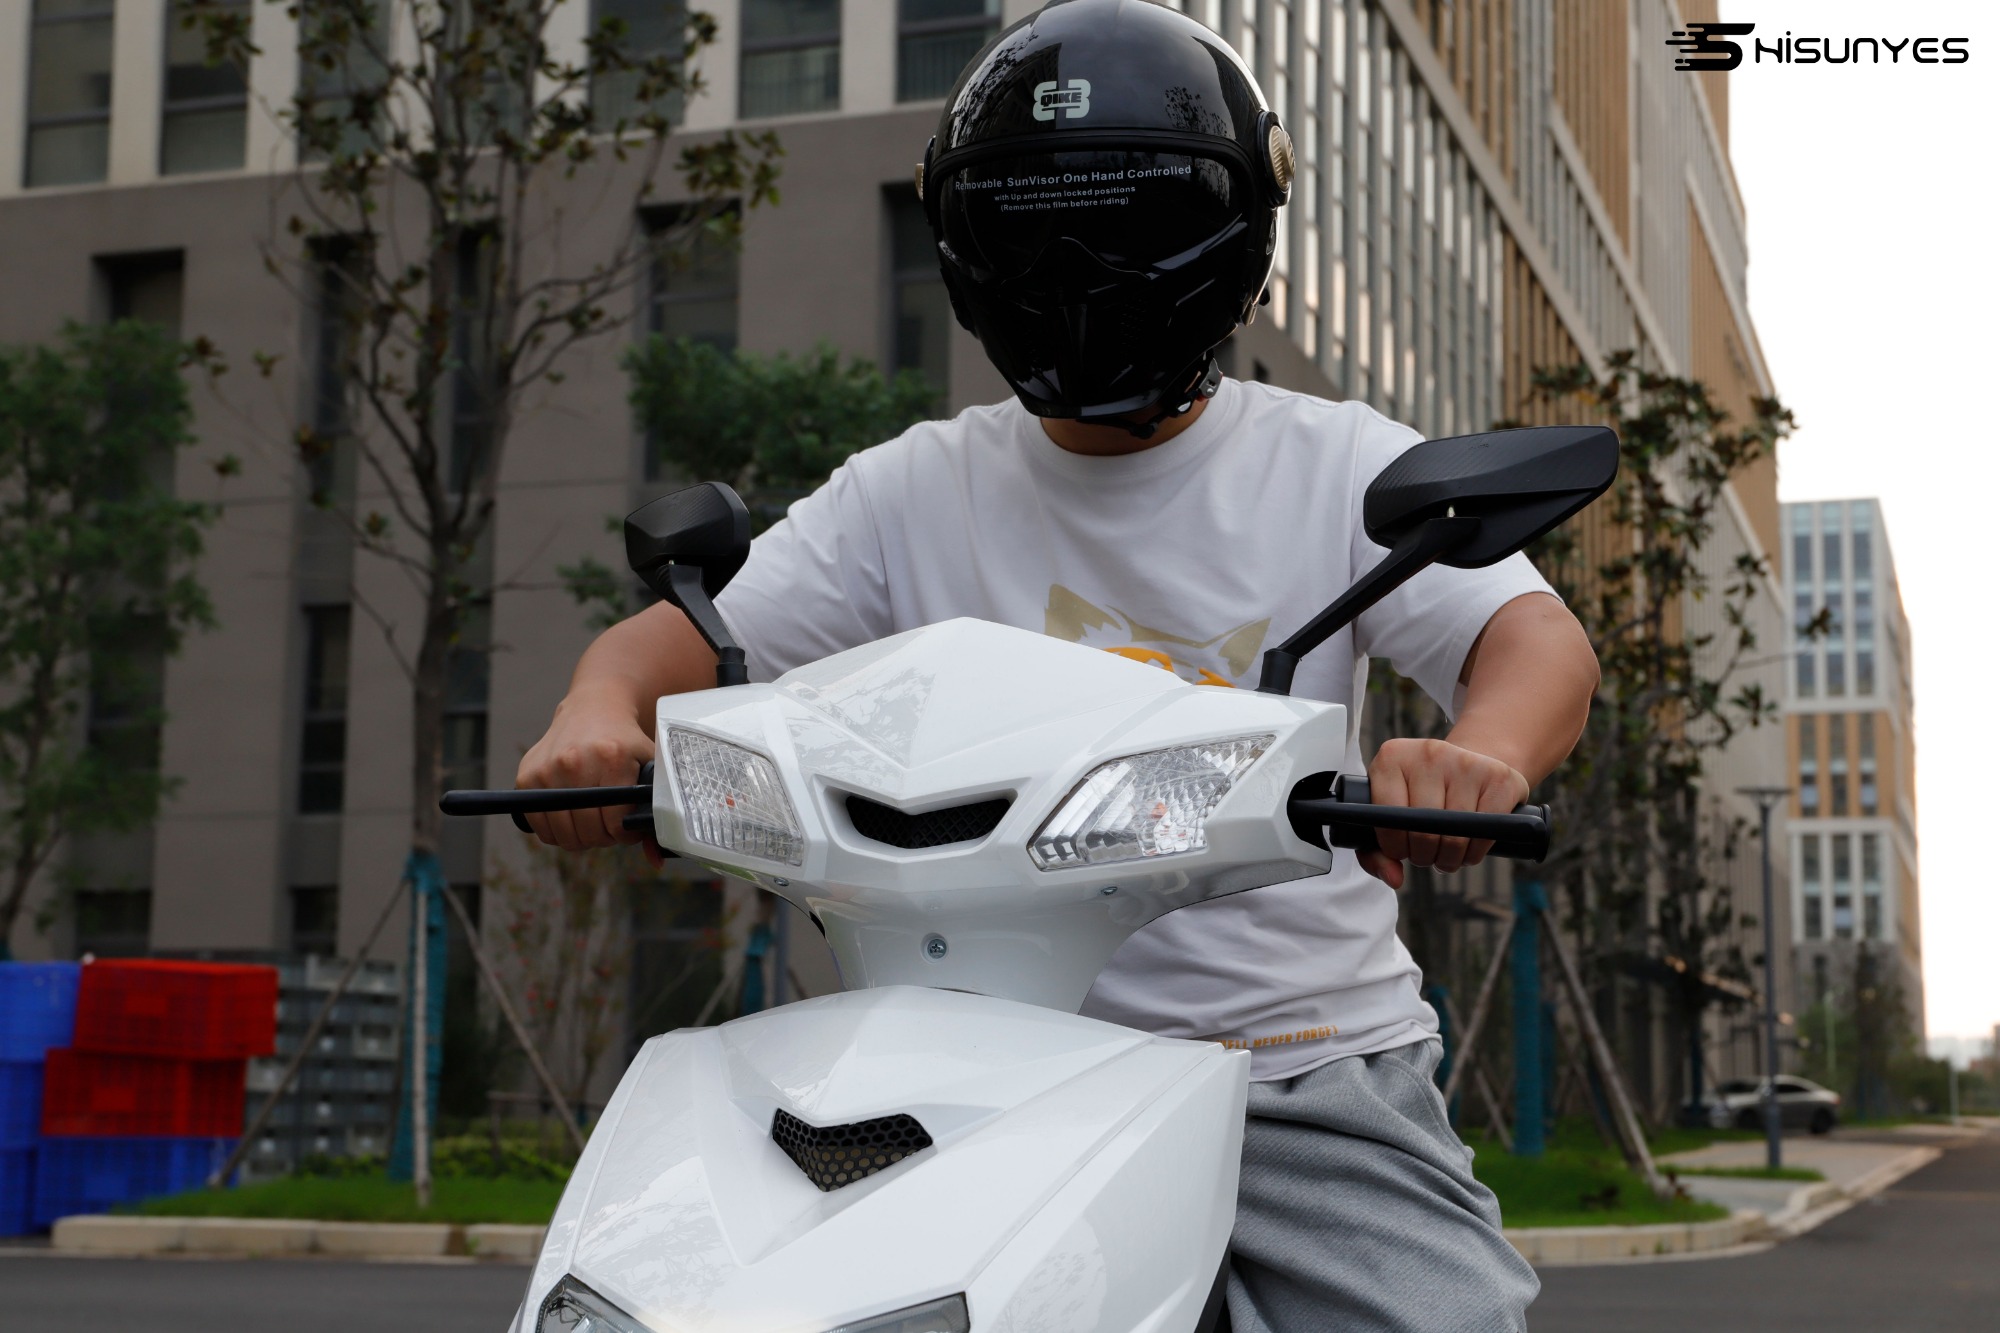 The electric scooter Hisunyes EM2